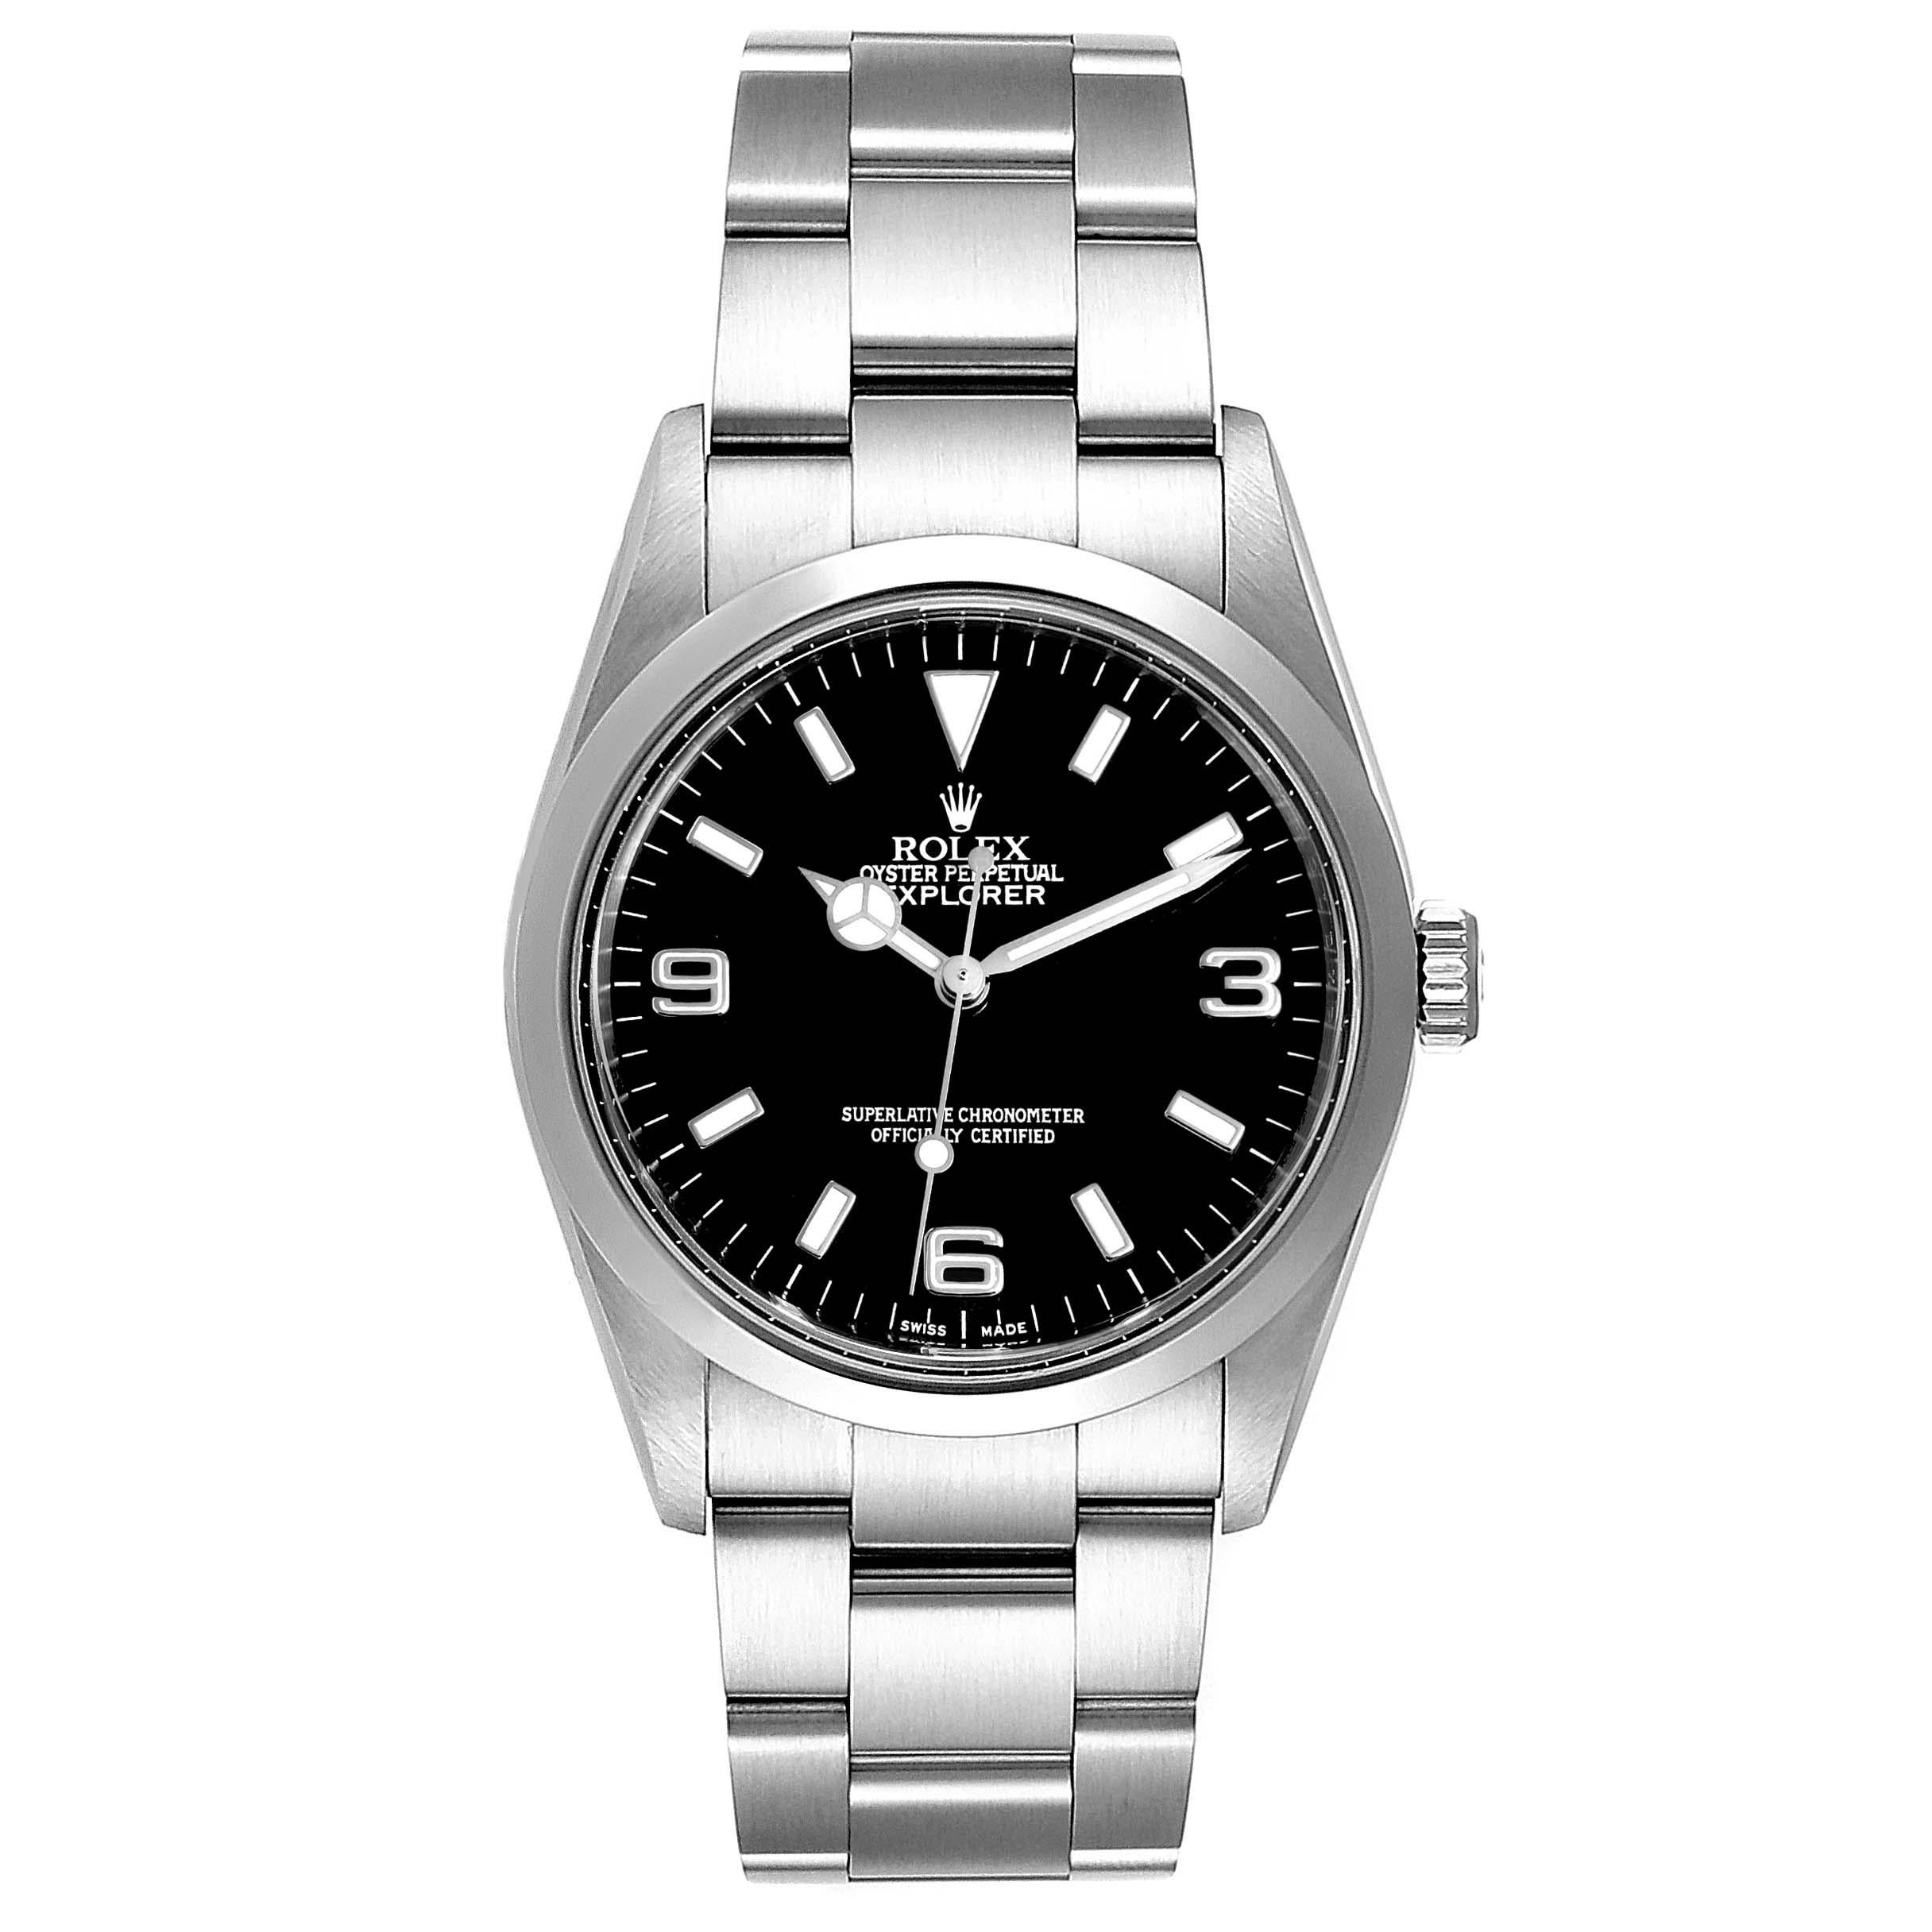 Rolex Explorer I Black Dial Stainless Steel Mens Watch 114270 Box. Officially certified chronometer self-winding movement. Stainless steel case 36.0 mm in diameter. Rolex logo on a crown. Stainless steel smooth domed bezel. Scratch resistant